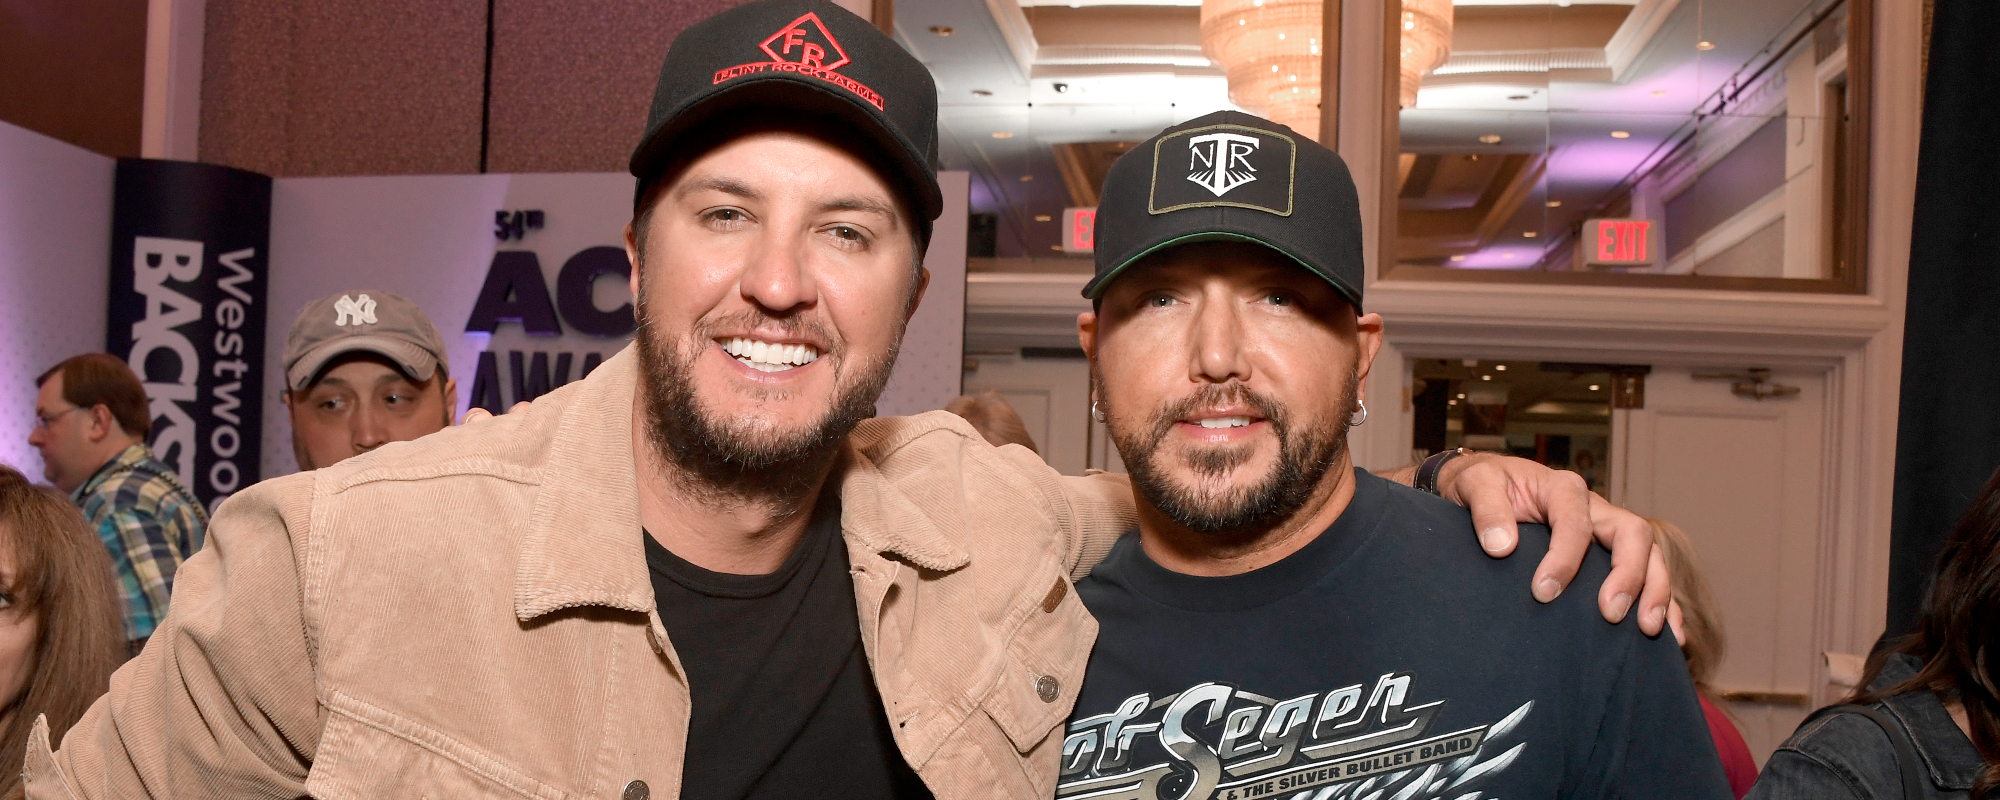 Jason Aldean and Luke Bryan Share Tips for Fatherhood: “You’re a Product of Your Environment”